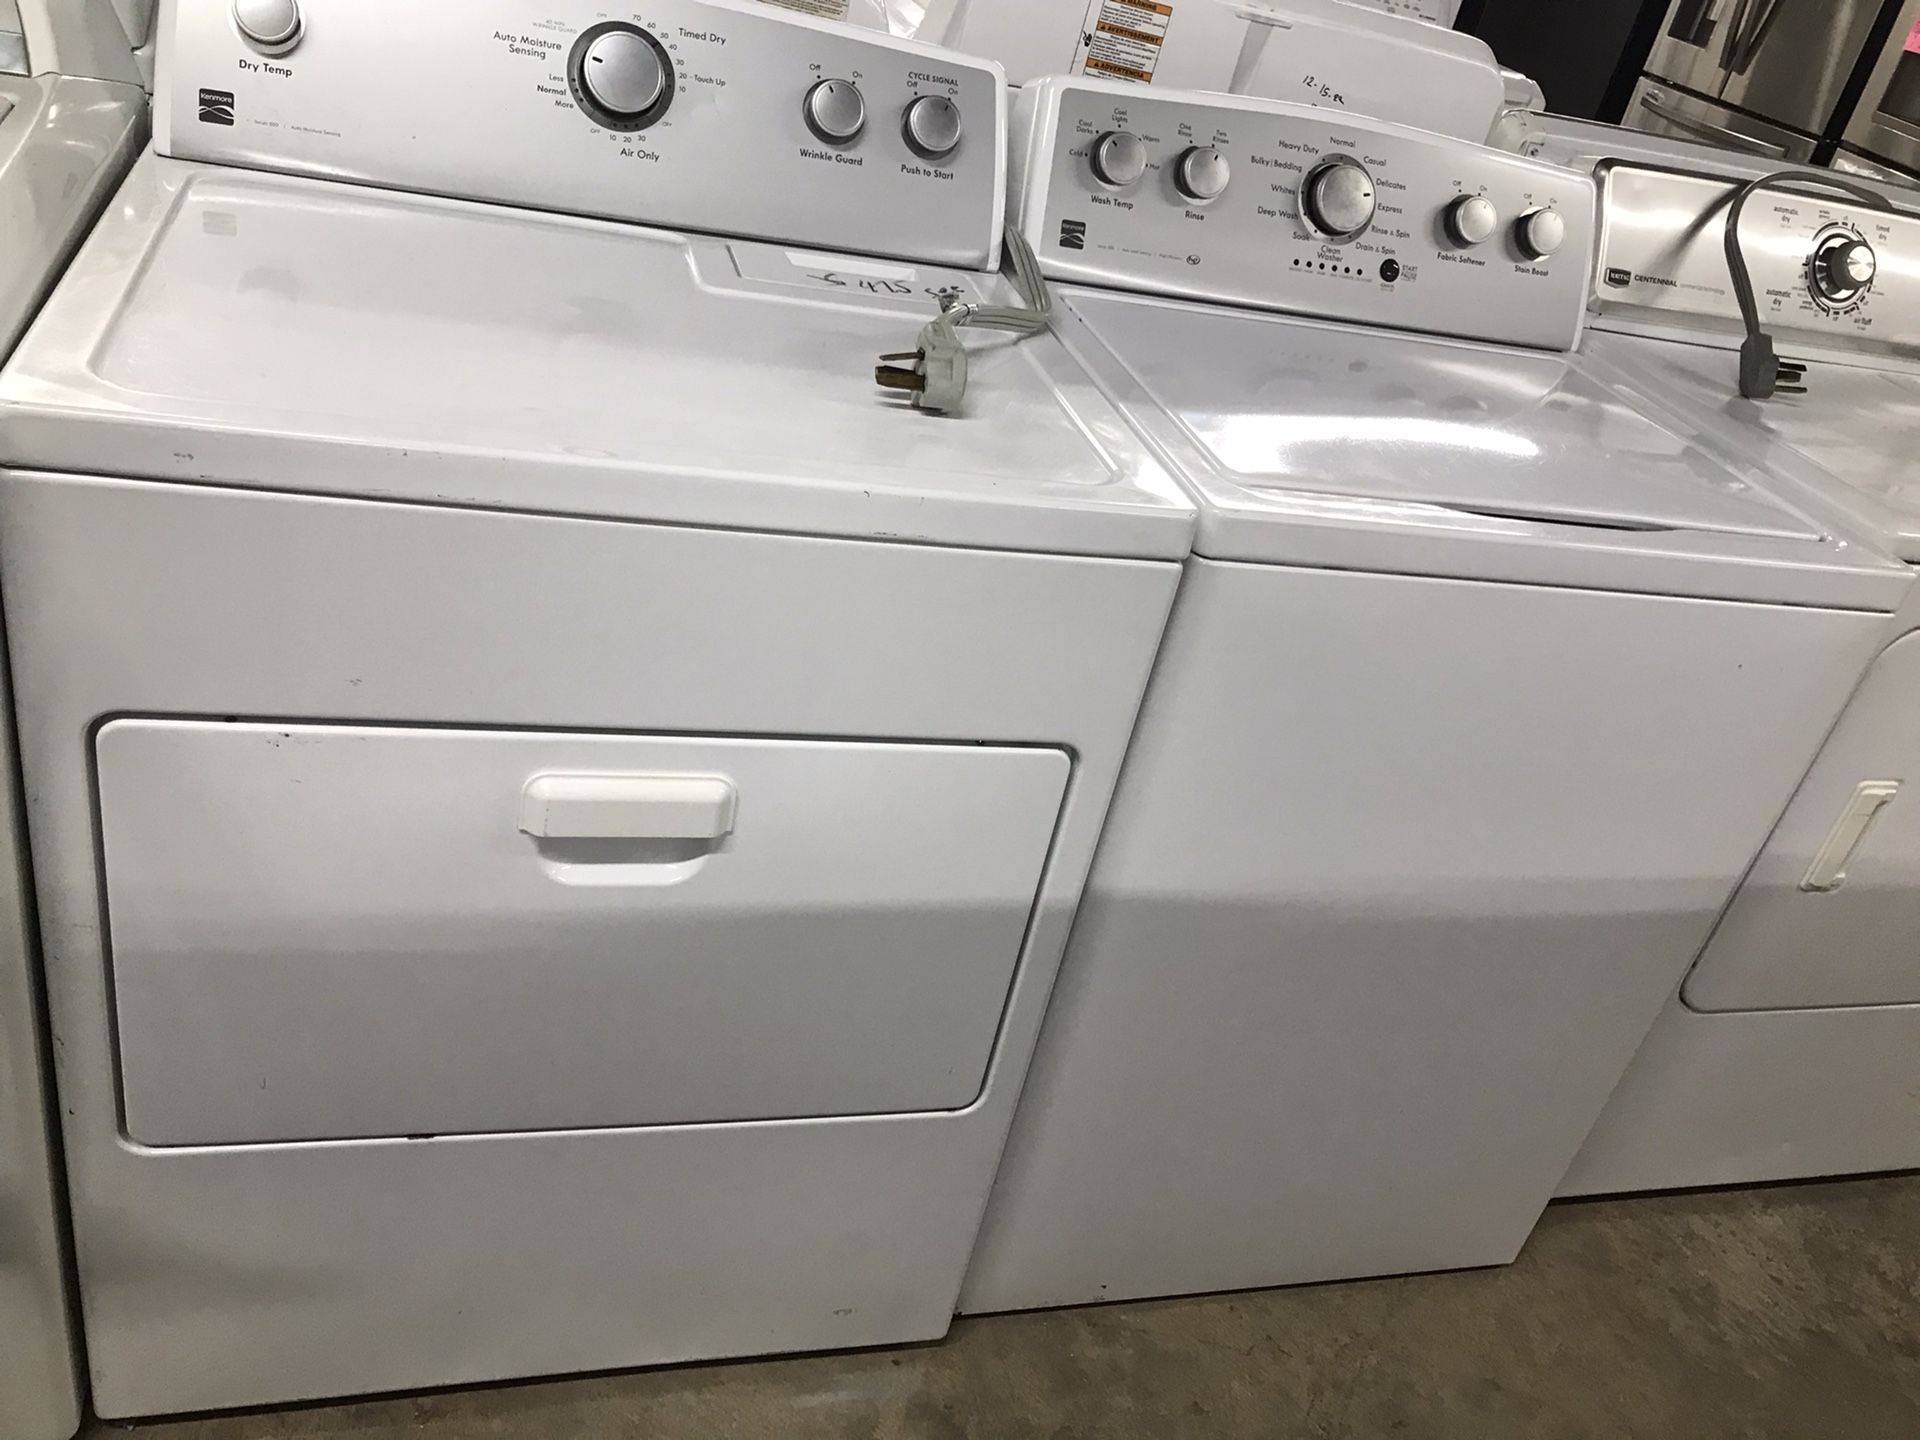 Kenmore Series 500 washer and dryer set